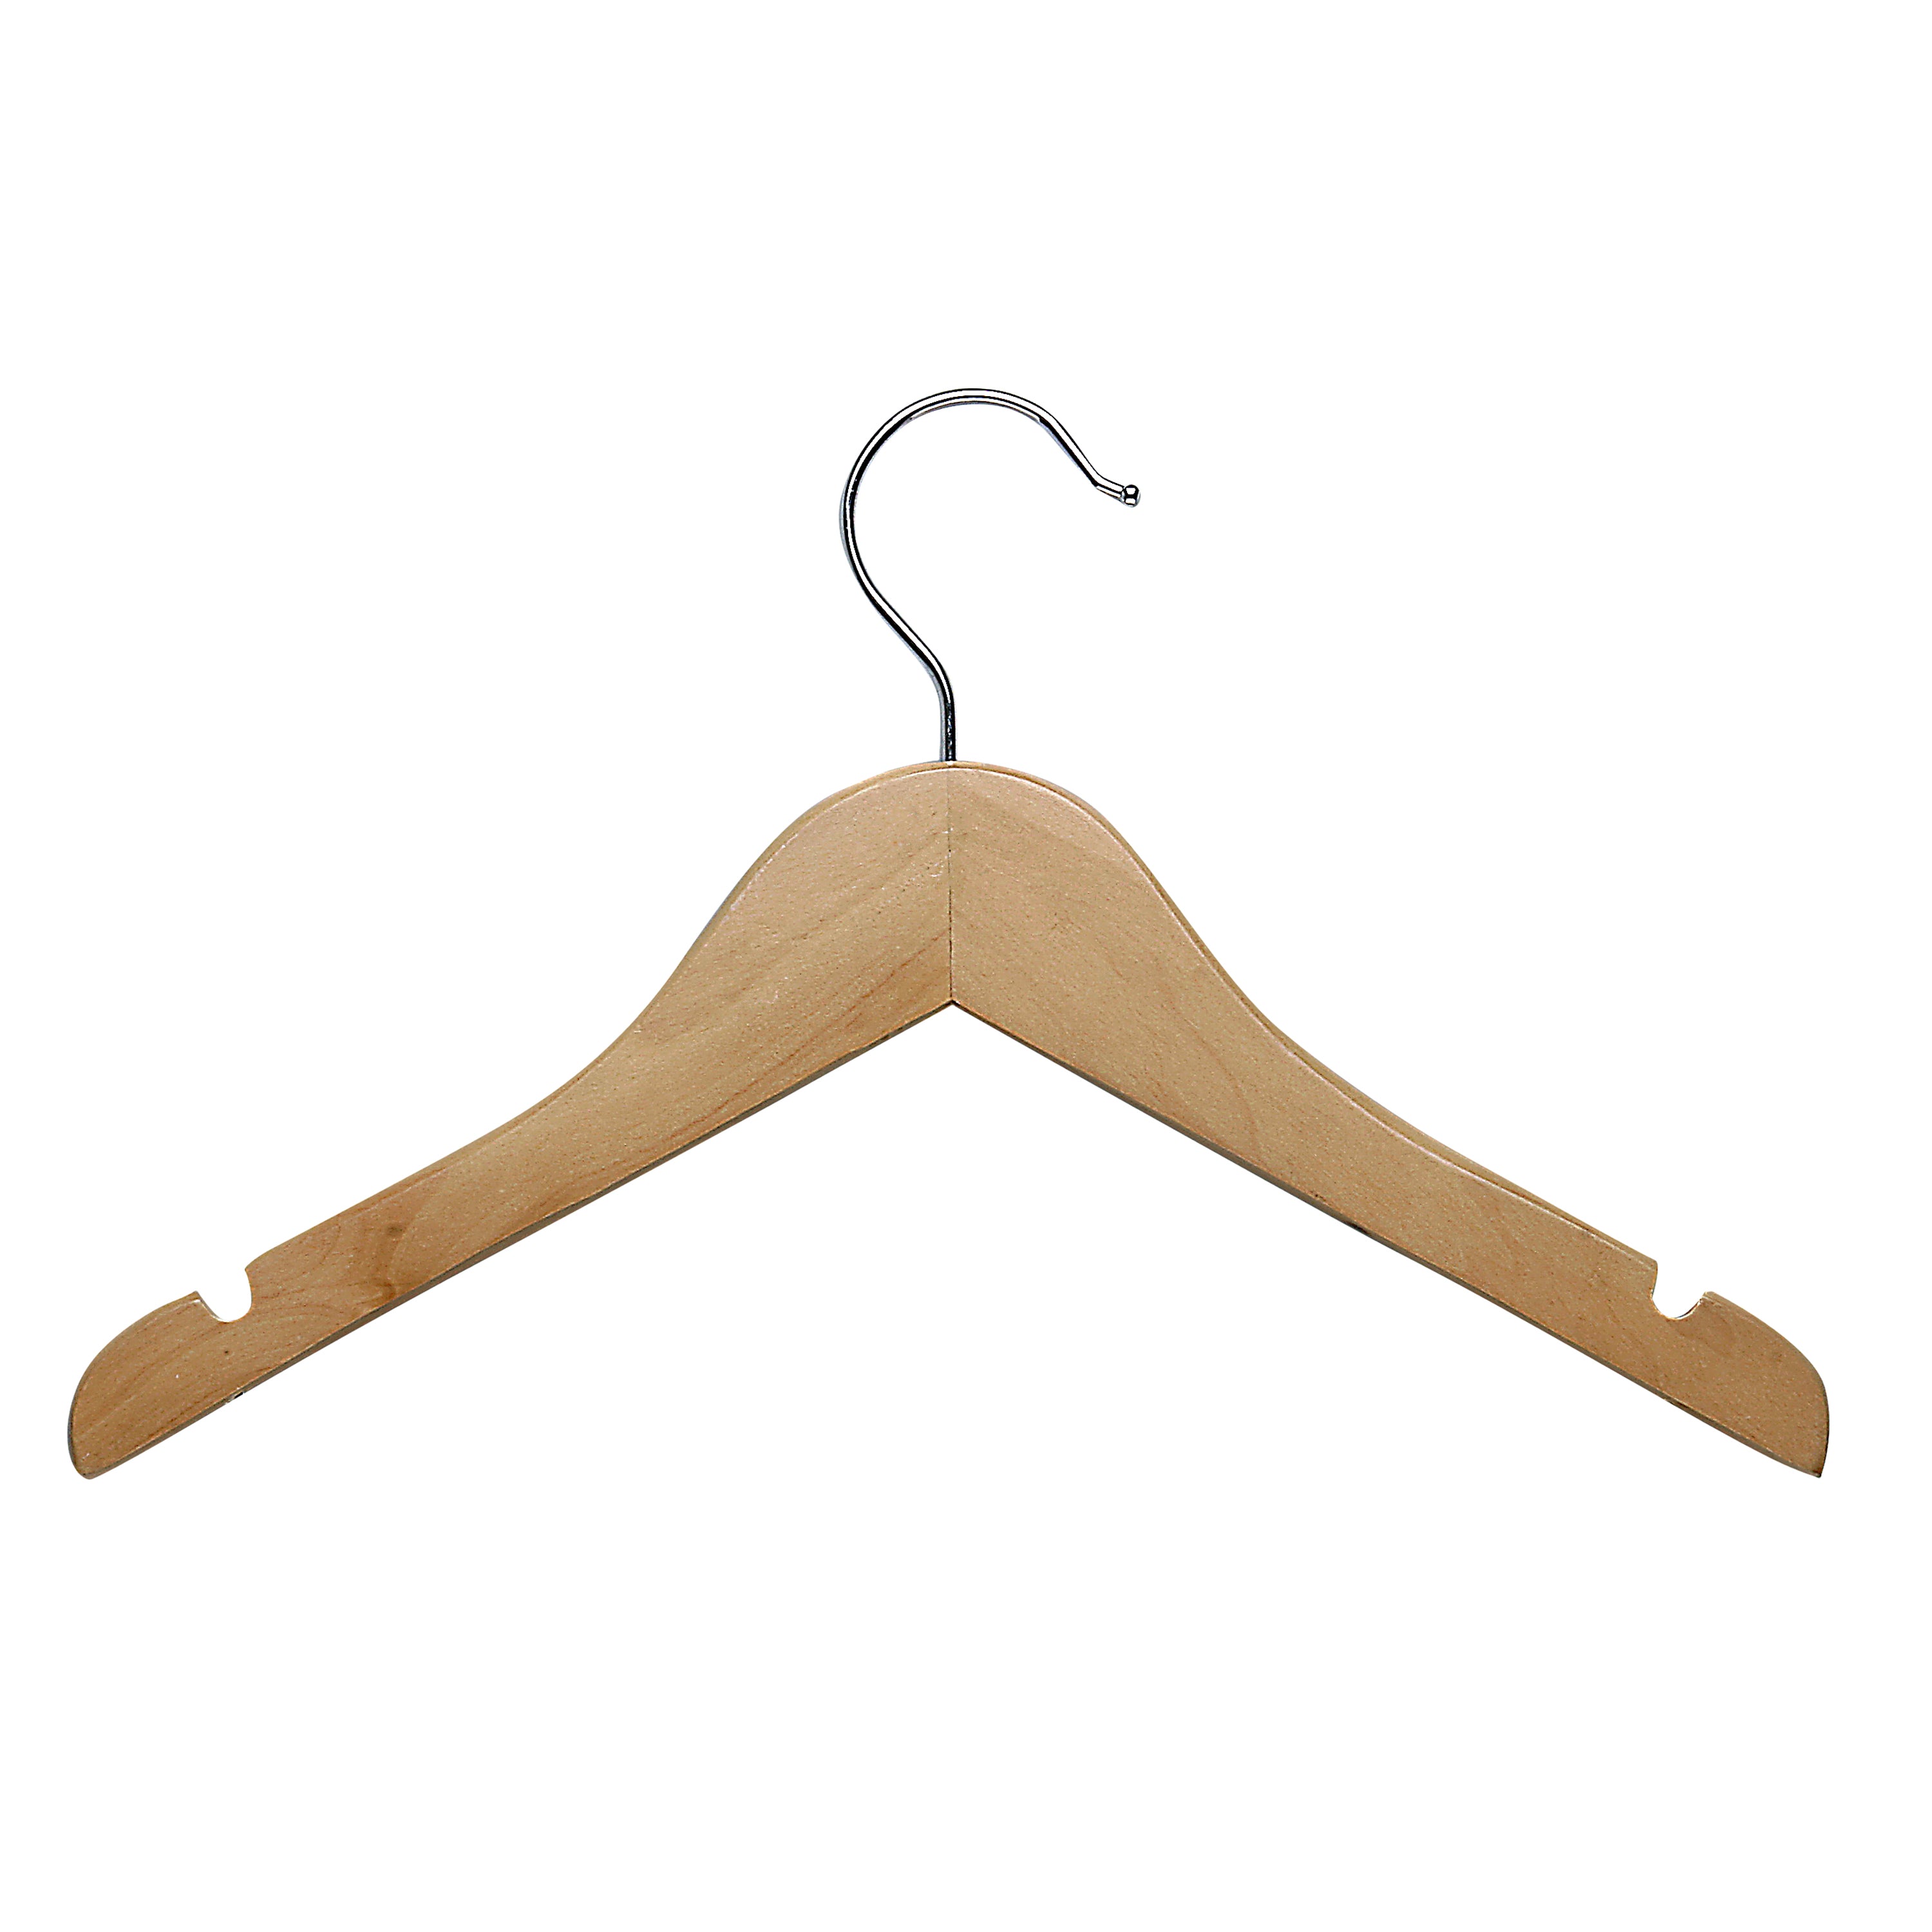 Baby Hangers for Closet 10Pack Baby Clothes Hangers Bulk Kids